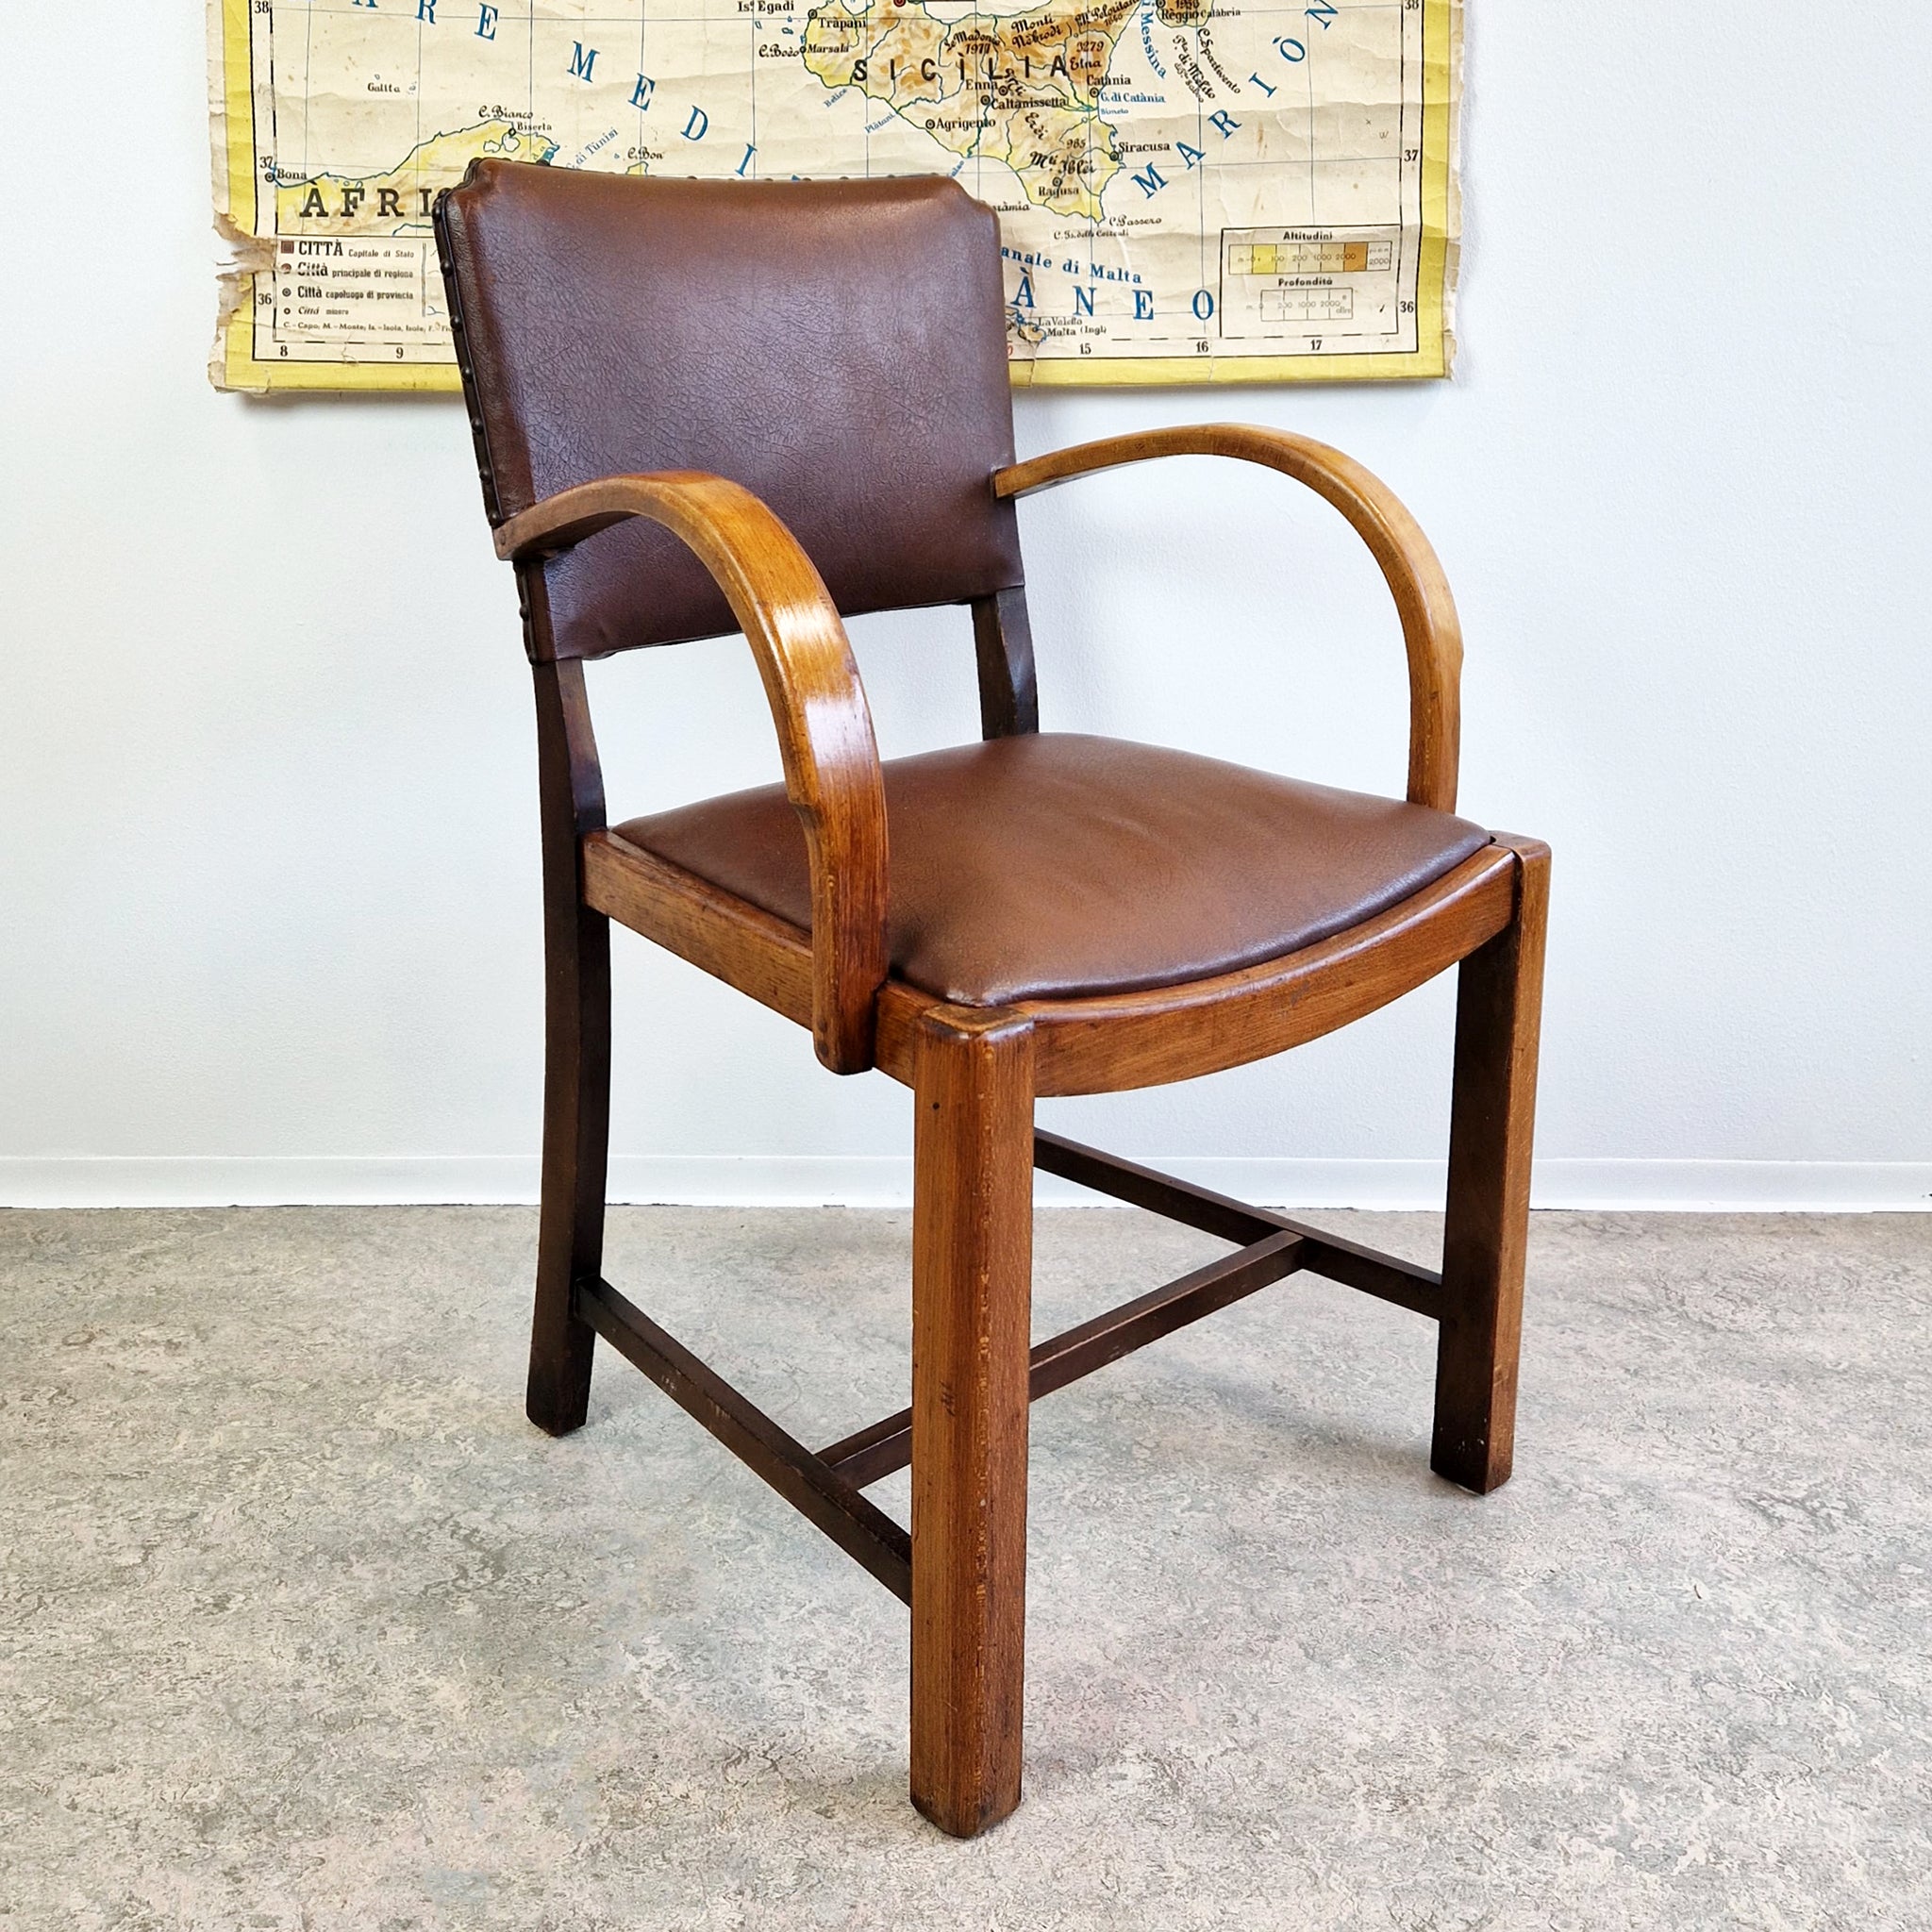 1940s armchair with bentwood armrests